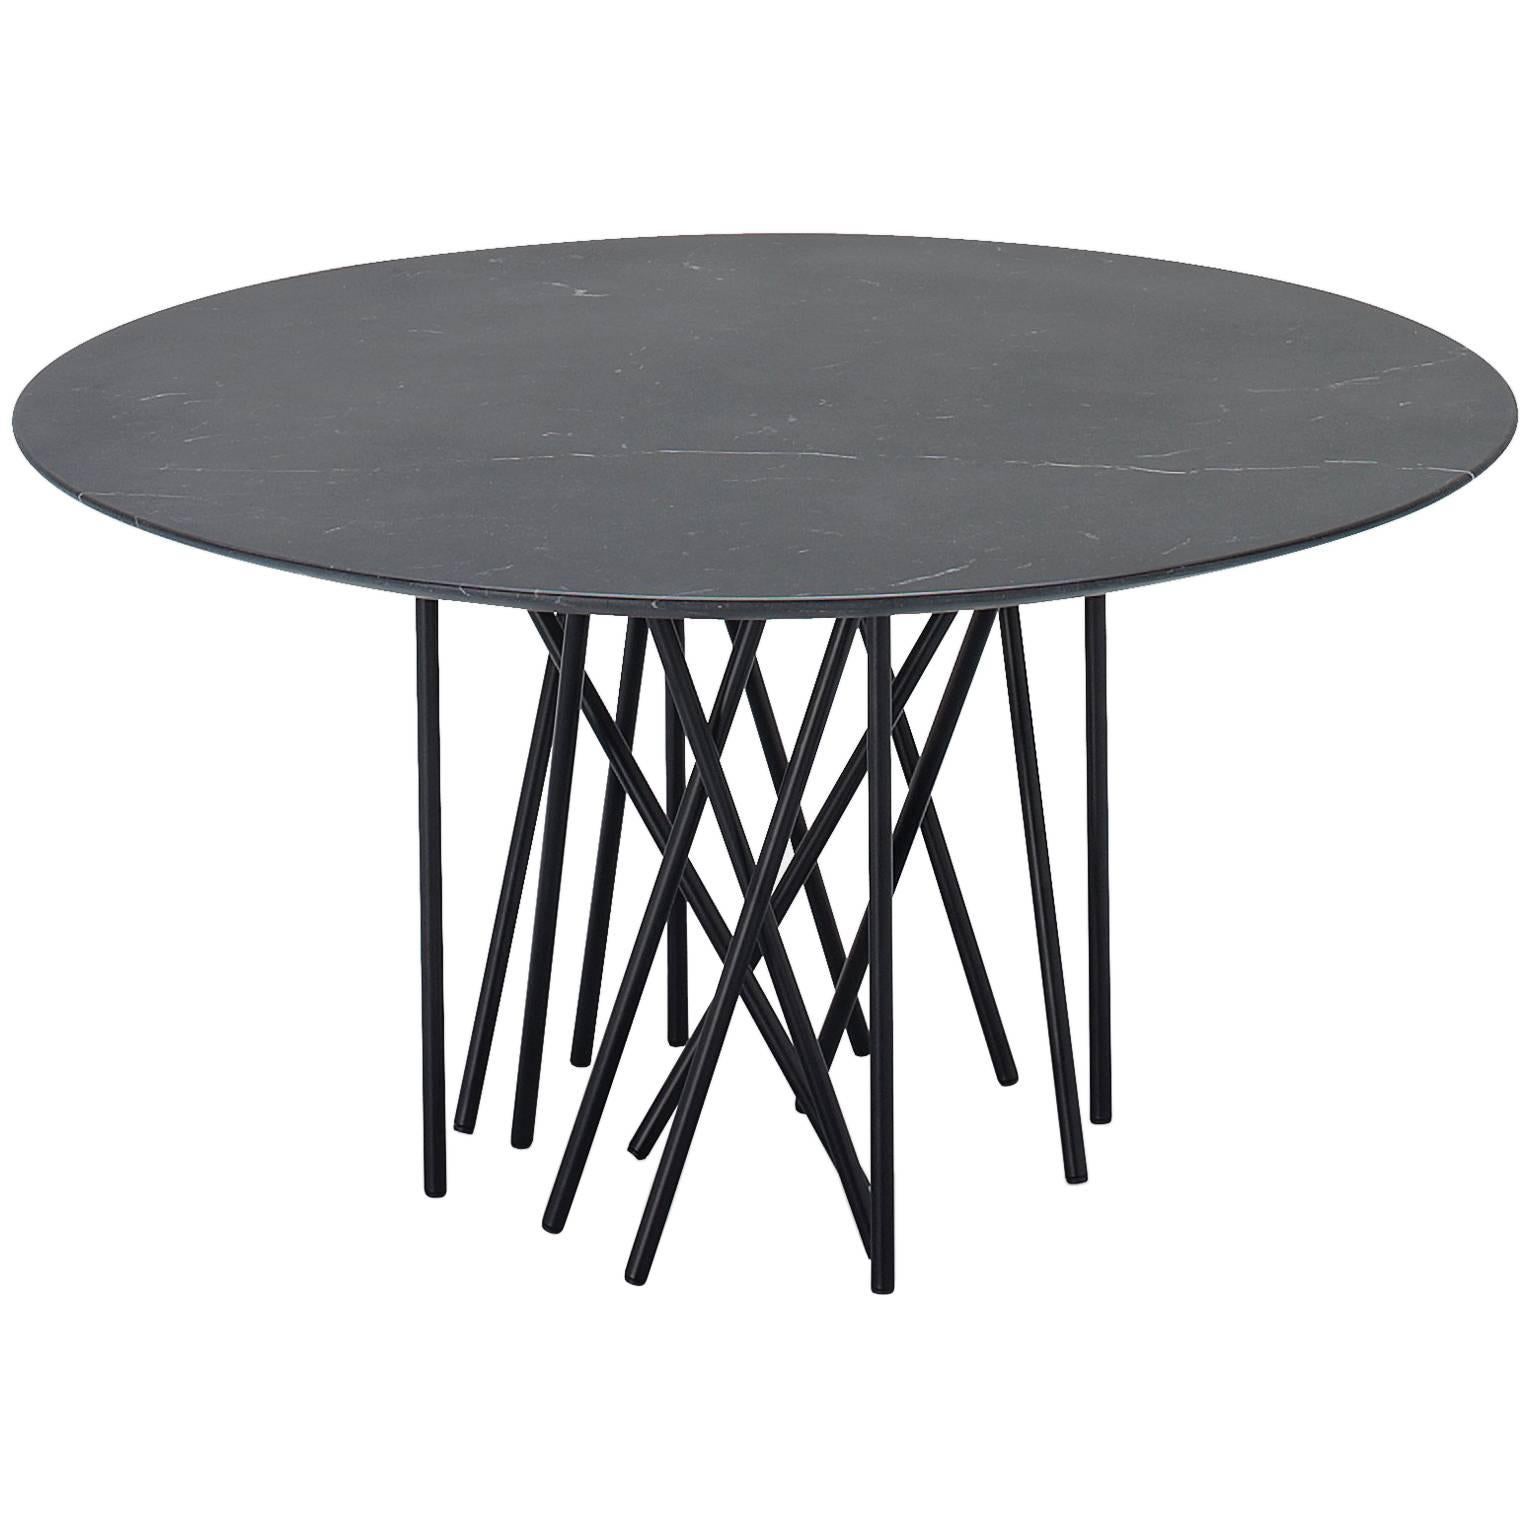 The shape is inspired by the sea creatures, statuesque and sinuous, with tentacles to support the top. It seems to be an improvised table, with a light and minimal look, where the thin stands, apparently posed in a casual way, oppose themselves to